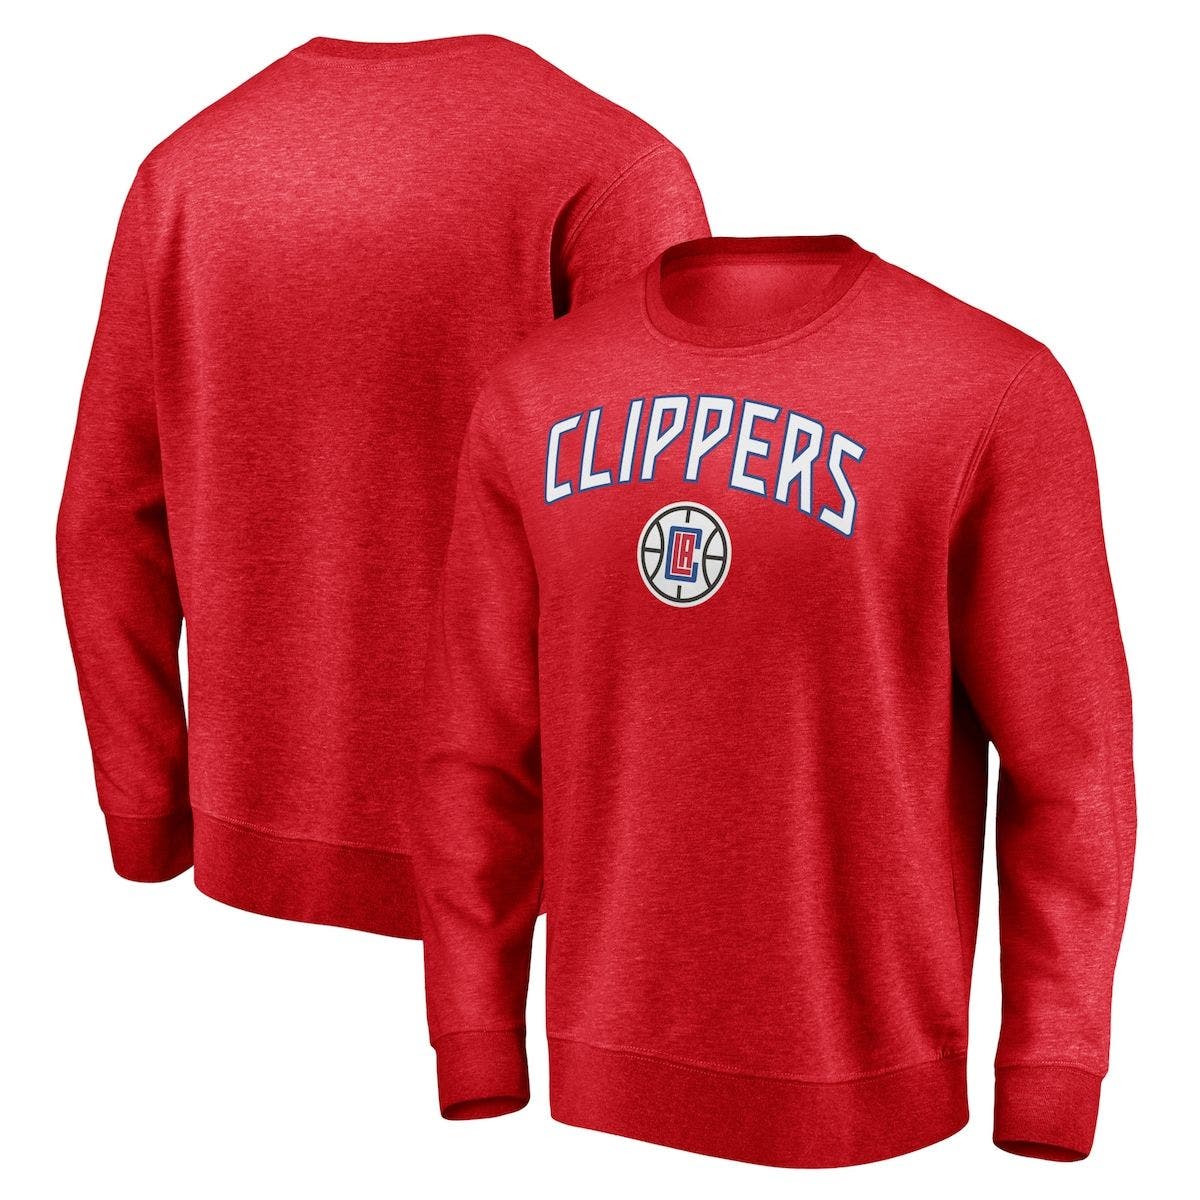 Men's Fanatics Branded Red La Clippers Game Time Arch Pullover Sweatshirt At Nordstrom, Size Xxx-lar